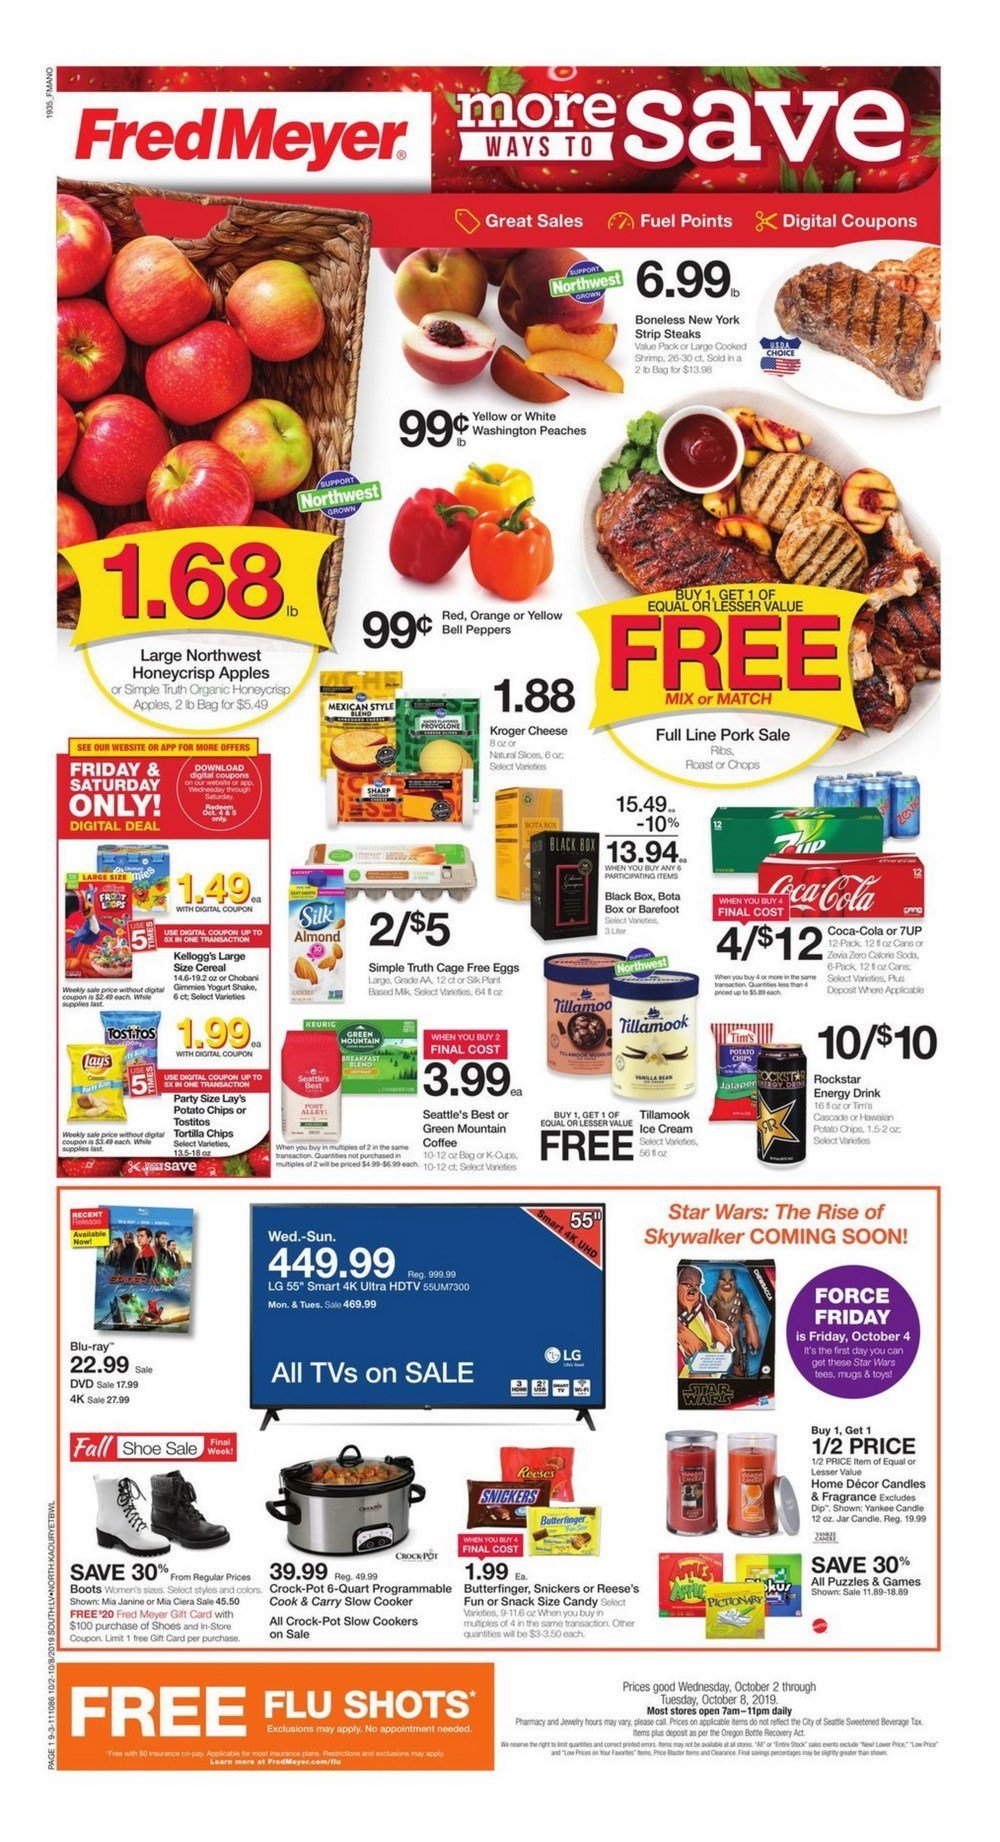 Fred Meyer Weekly Ad Oct 02 Oct 08, 2019